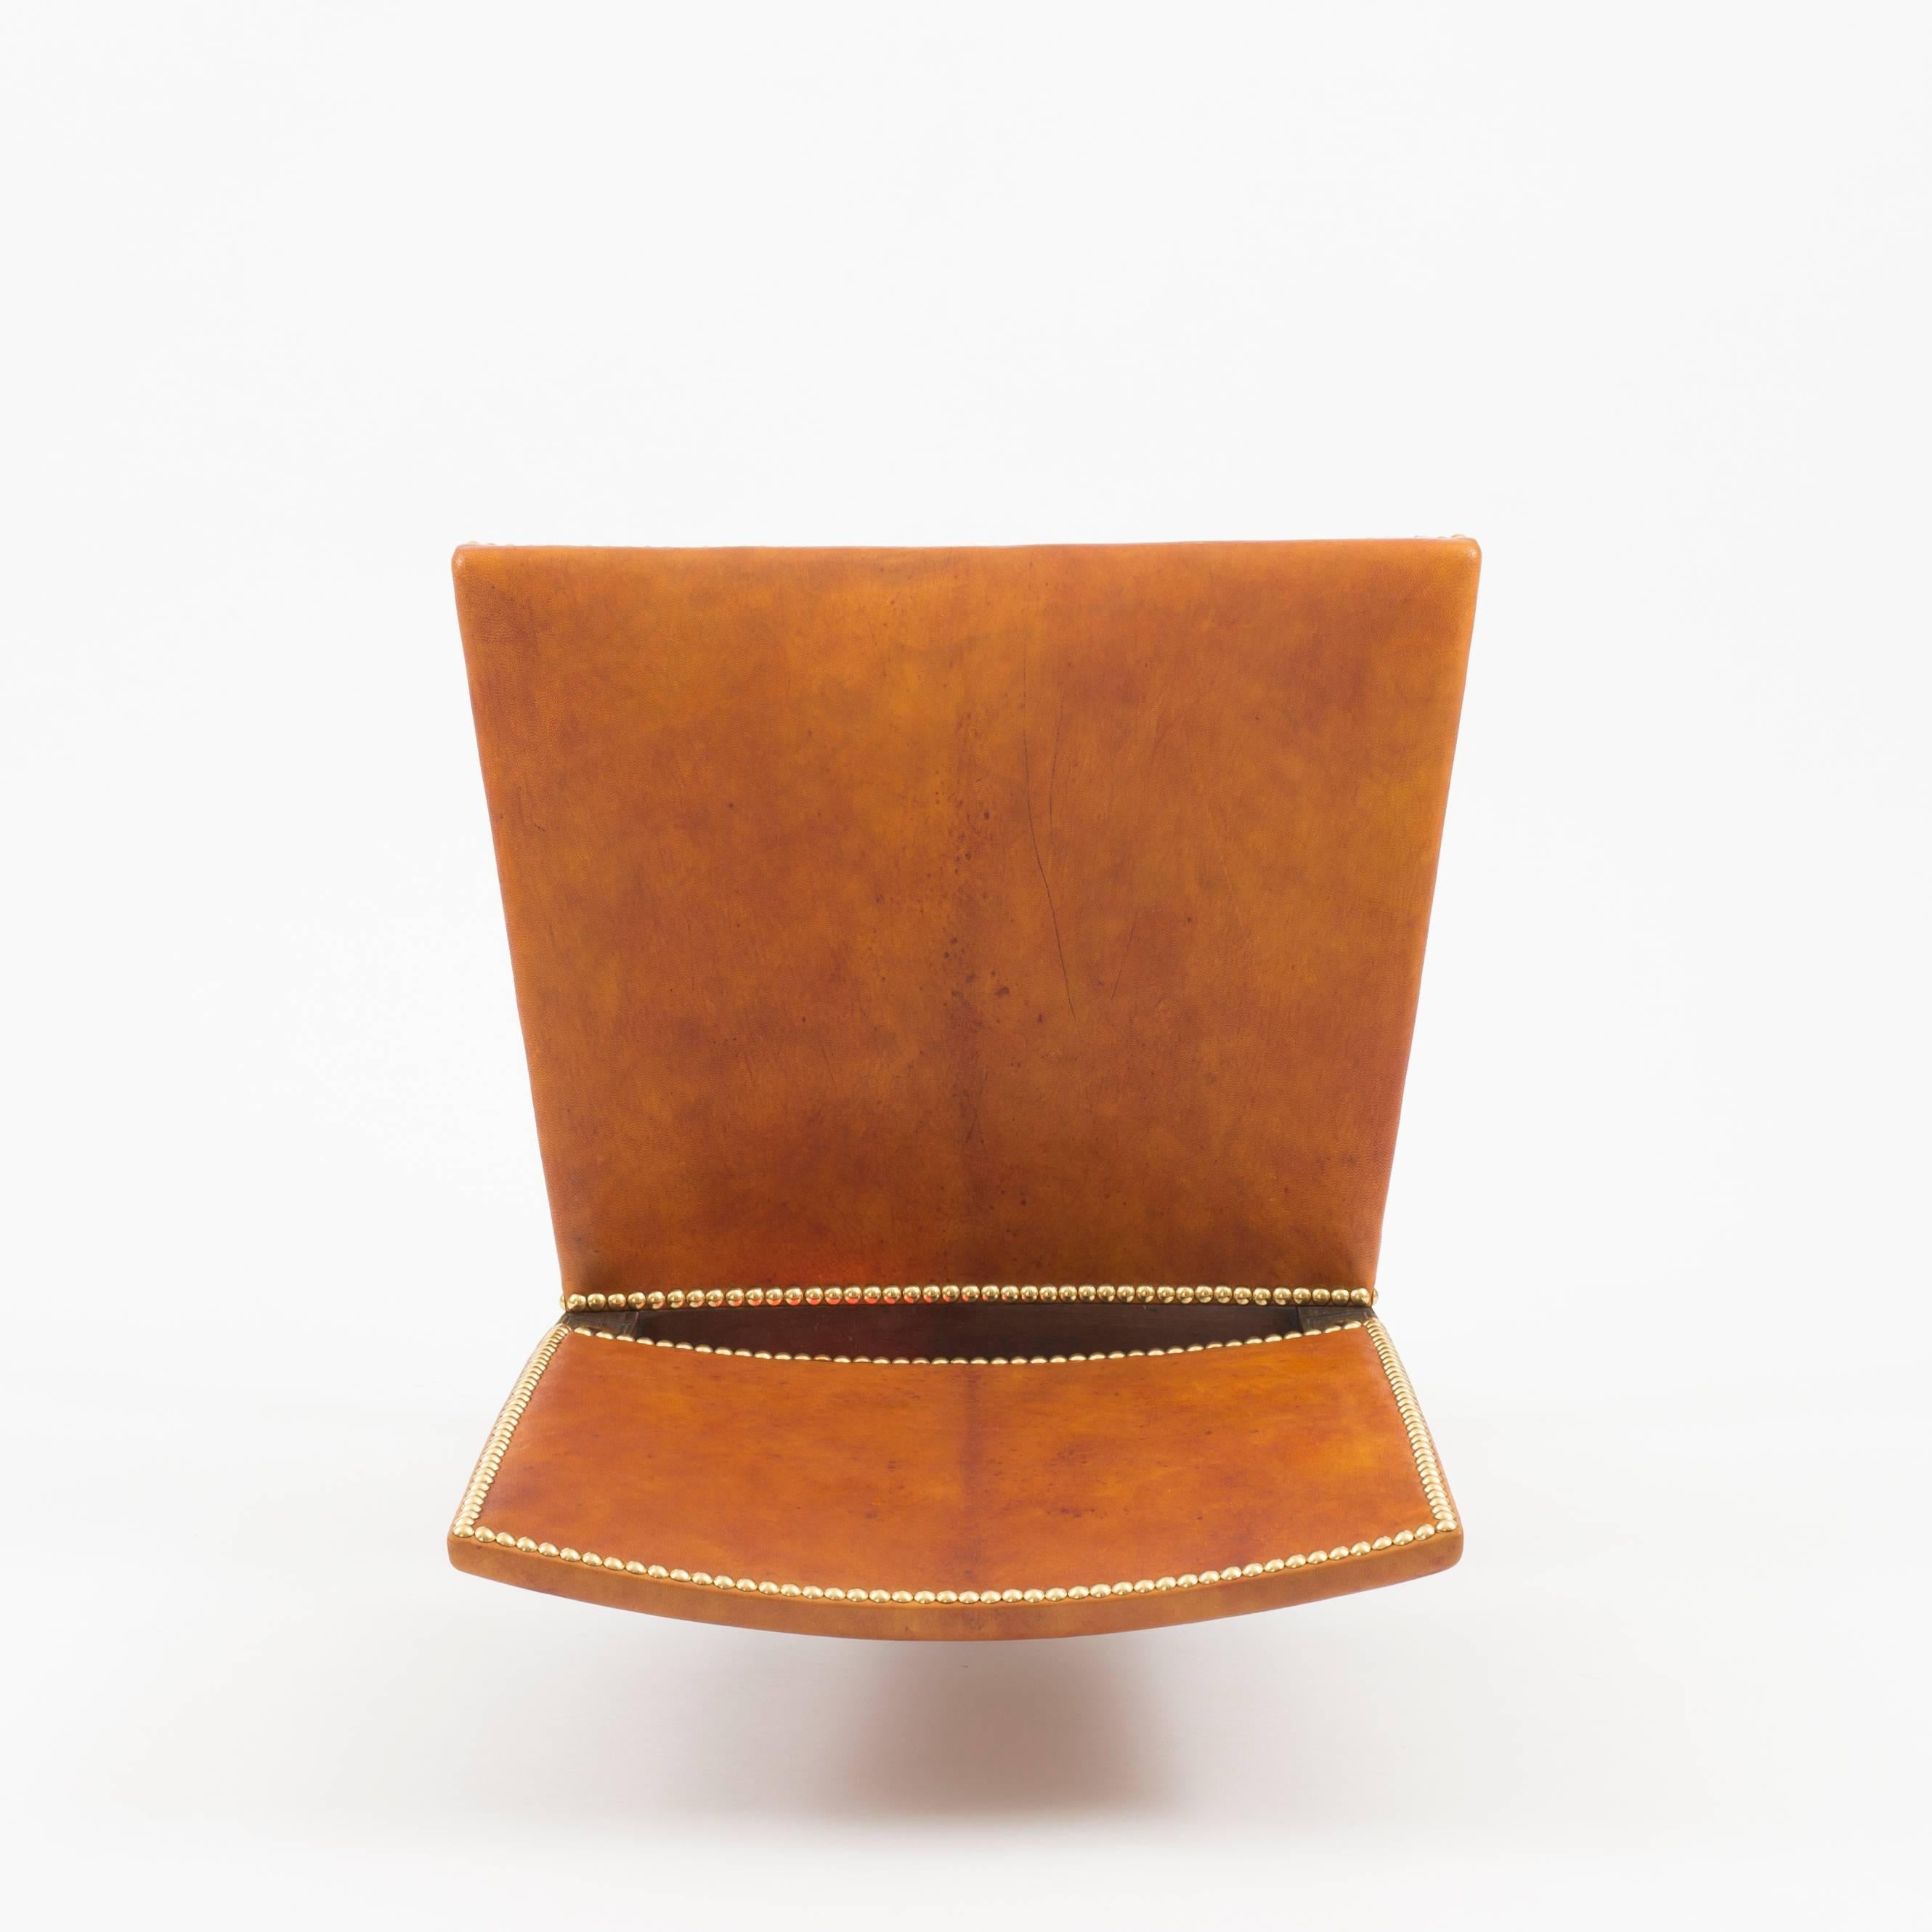 Brass Kaare Klint Red Chair in Cuban Mahogany and Niger Leather, 1928